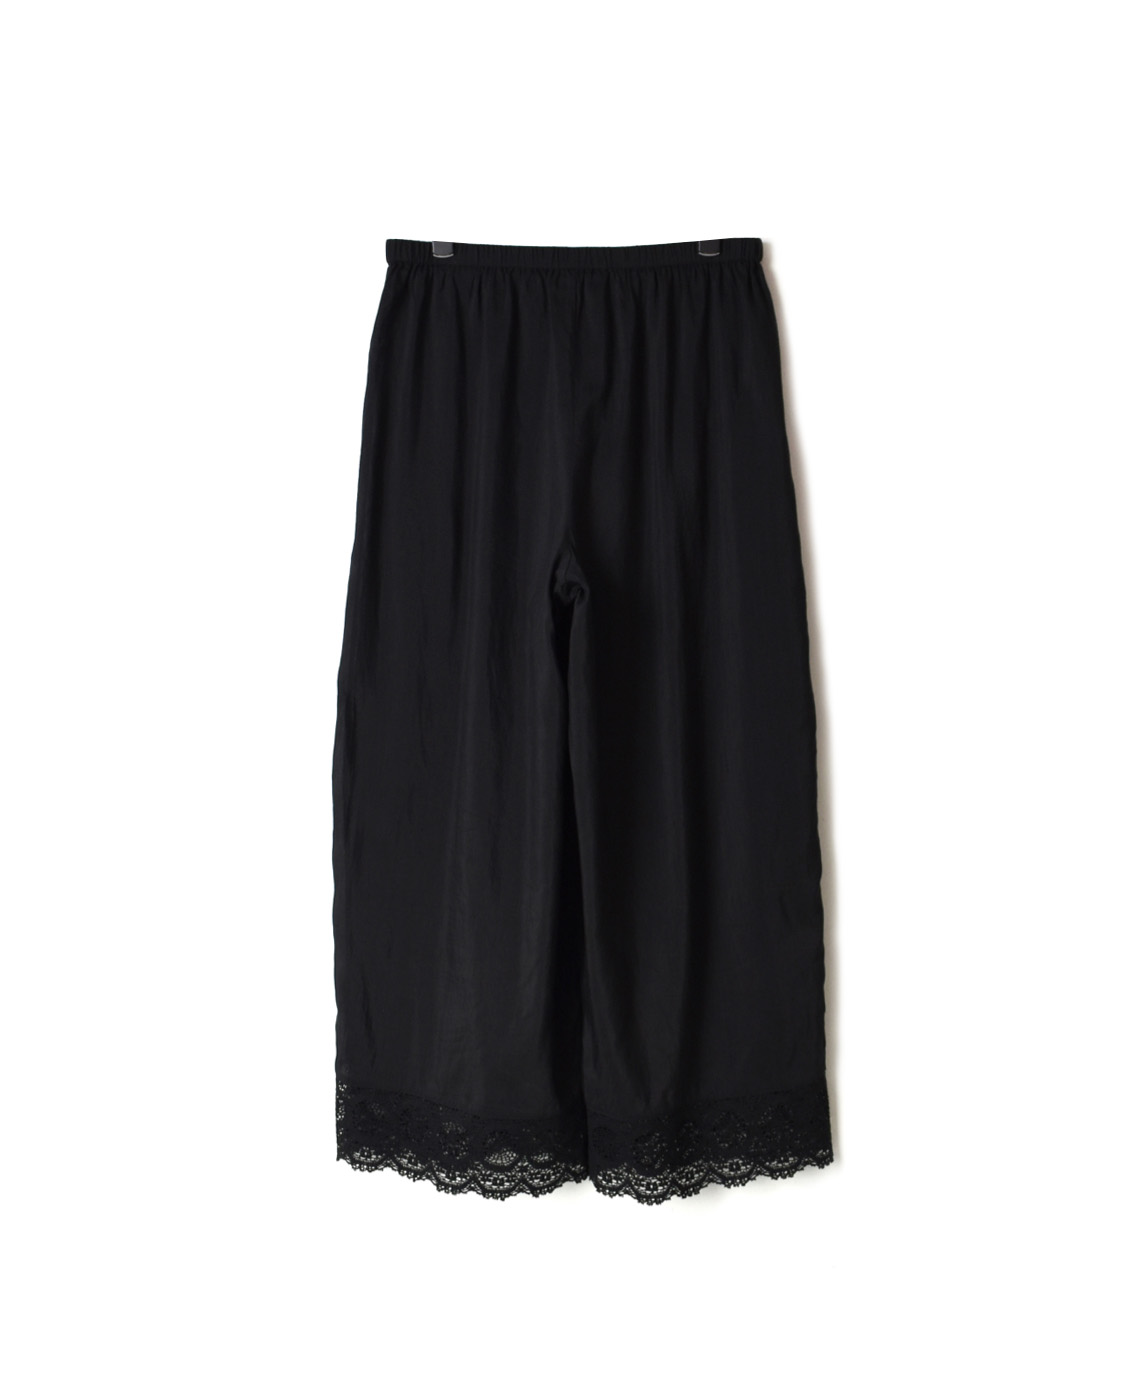 INMDS20143 (アンダーウェア) COTTON SILK EASY PANTS WITH LACE